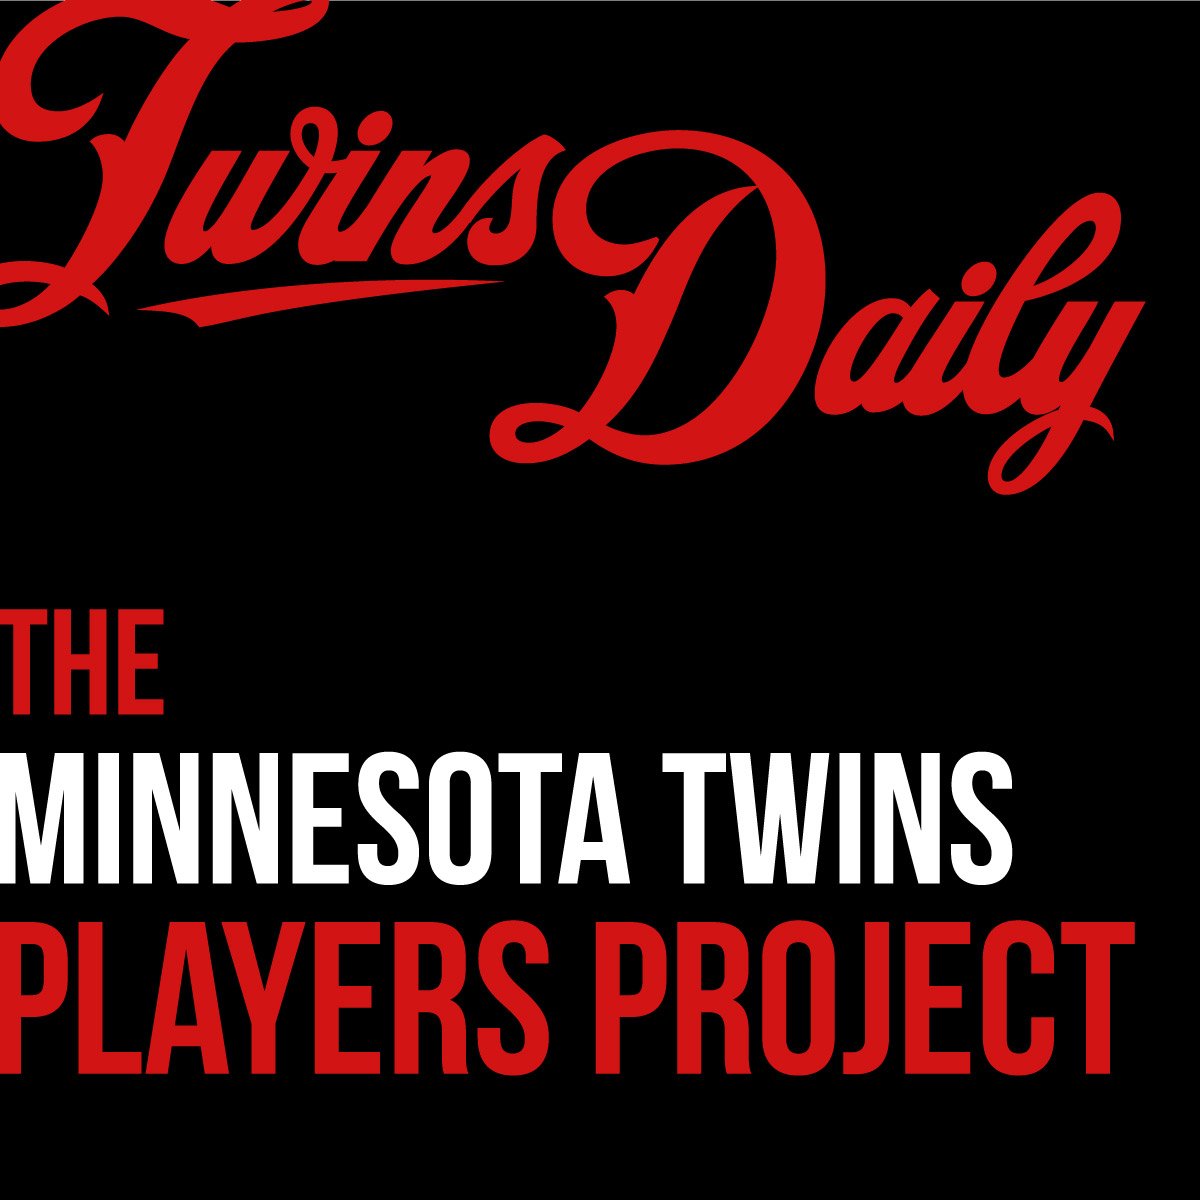 The Minnesota Twins Players Project